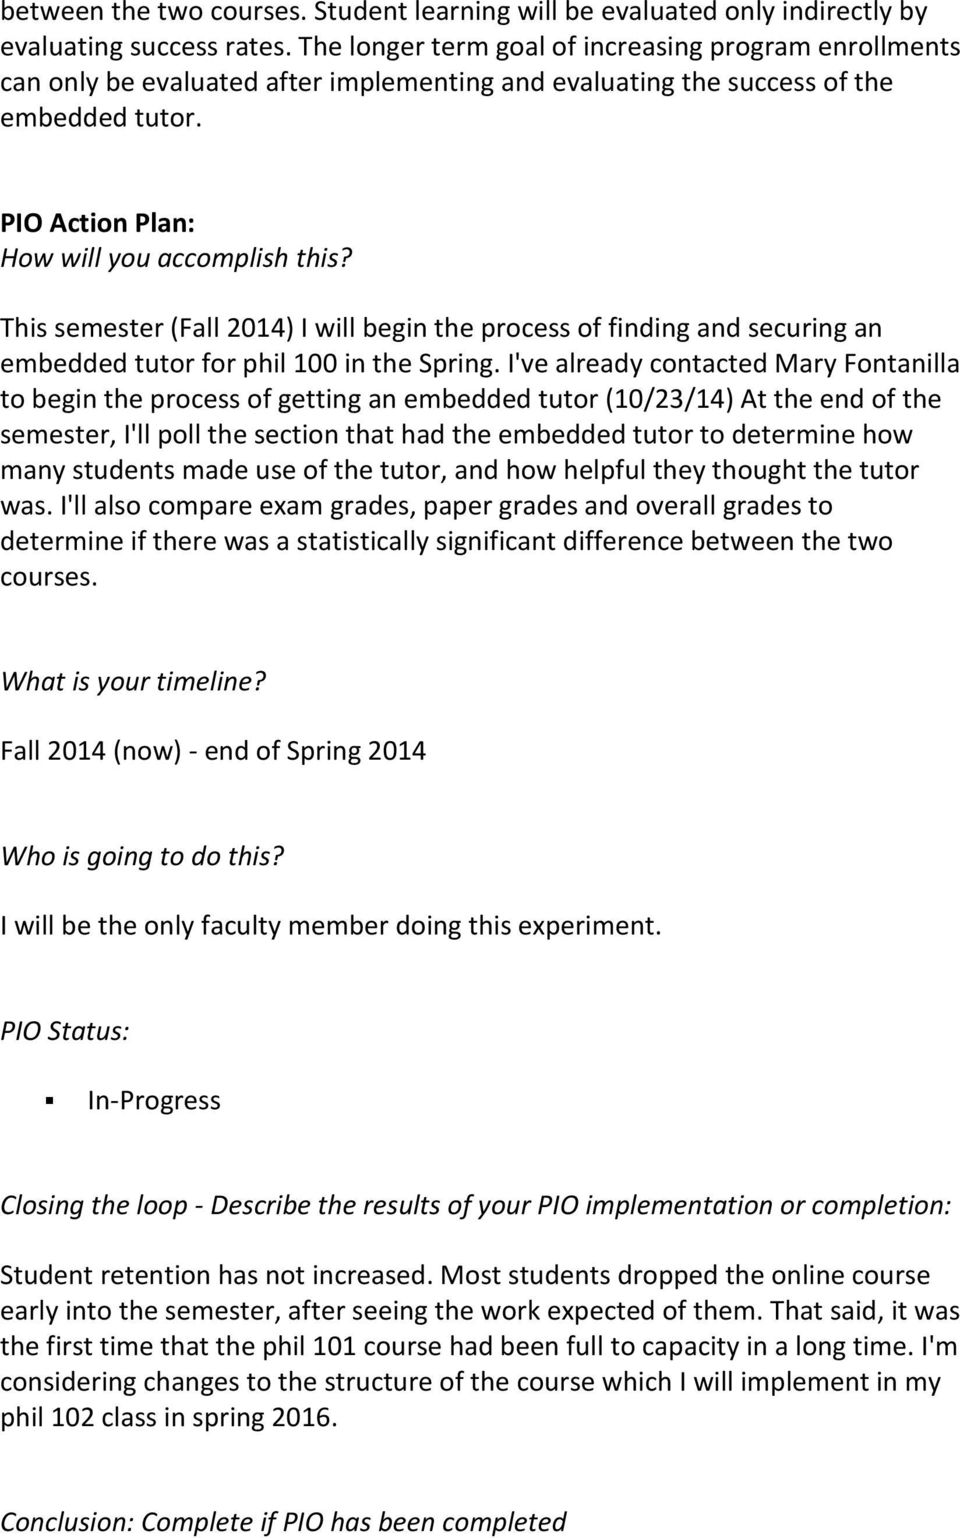 This semester (Fall 2014) I will begin the process of finding and securing an embedded tutor for phil 100 in the Spring.